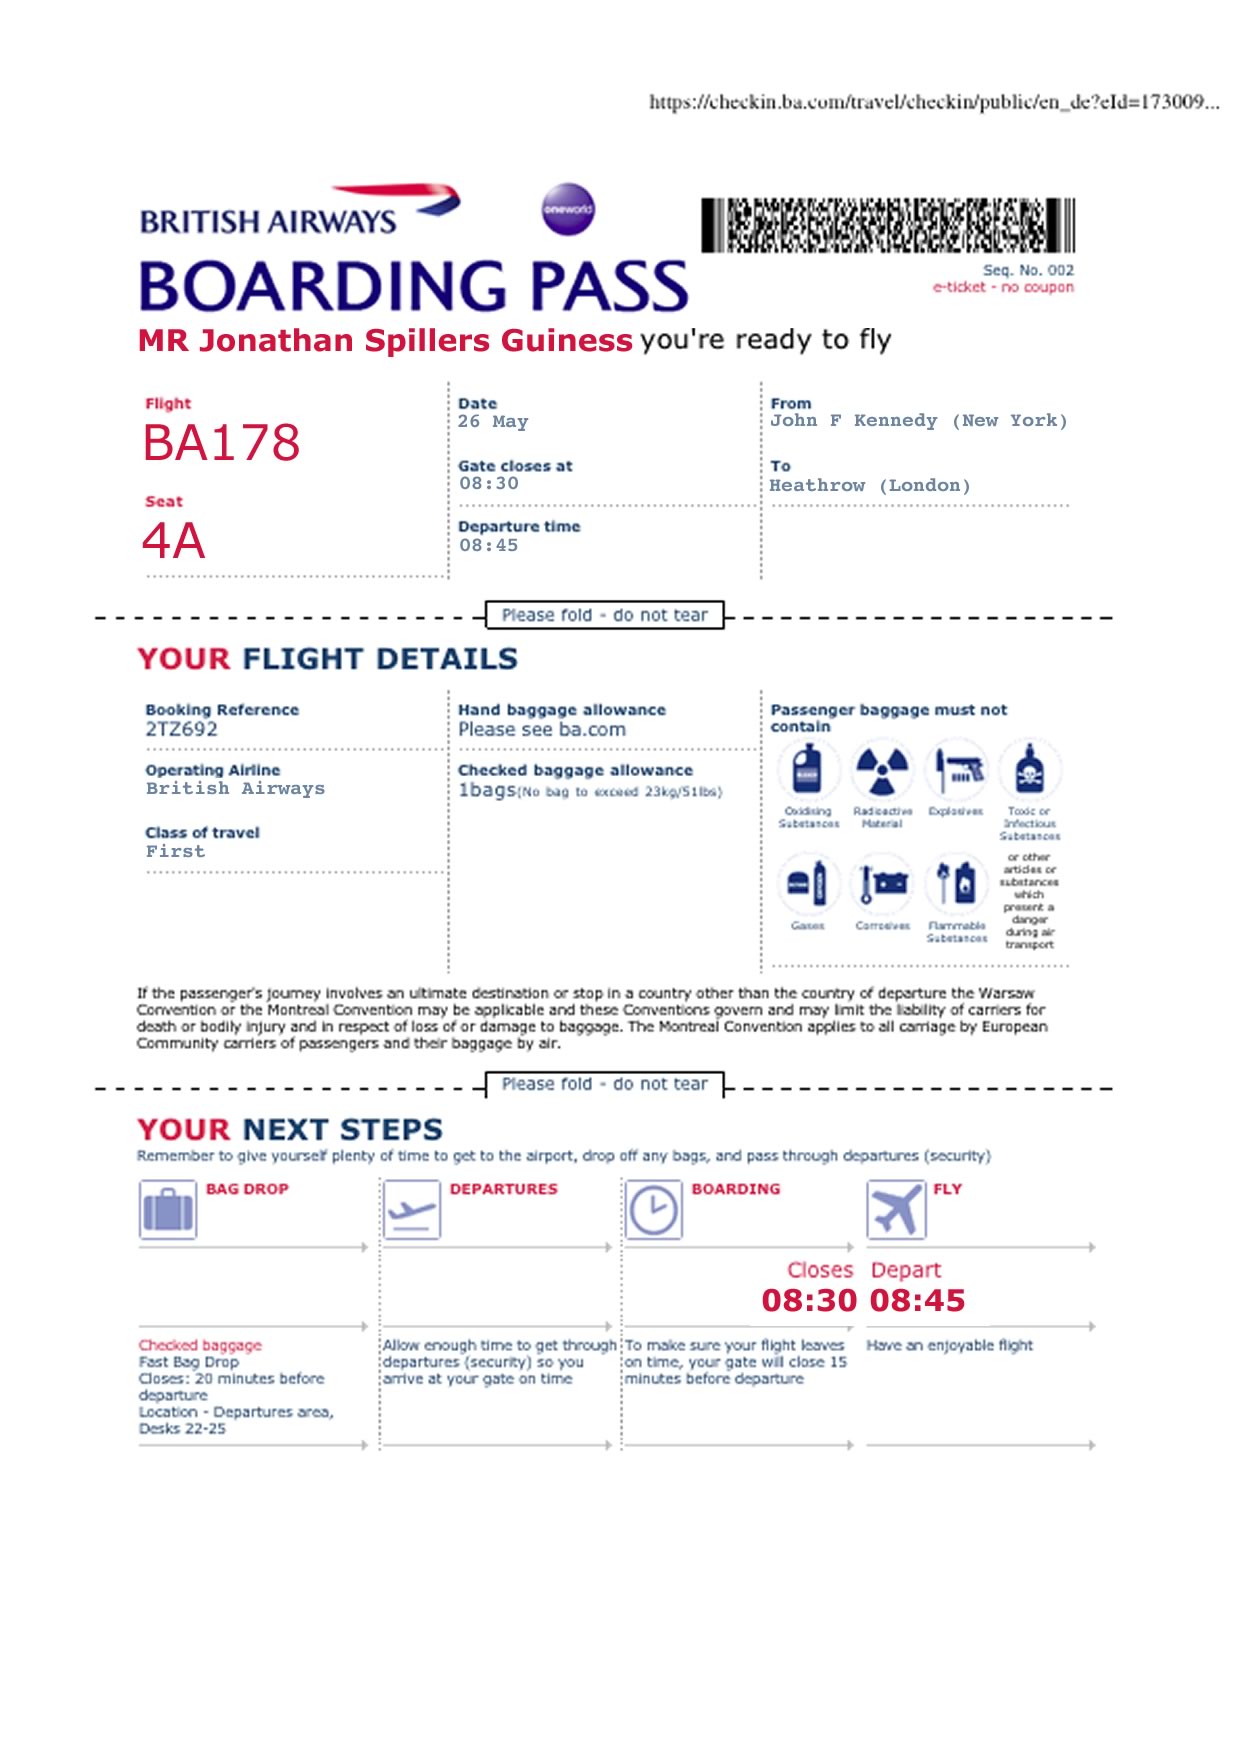 Installation artefacts: Joanthan’s e-ticket/boarding pass | MA Interactive ...